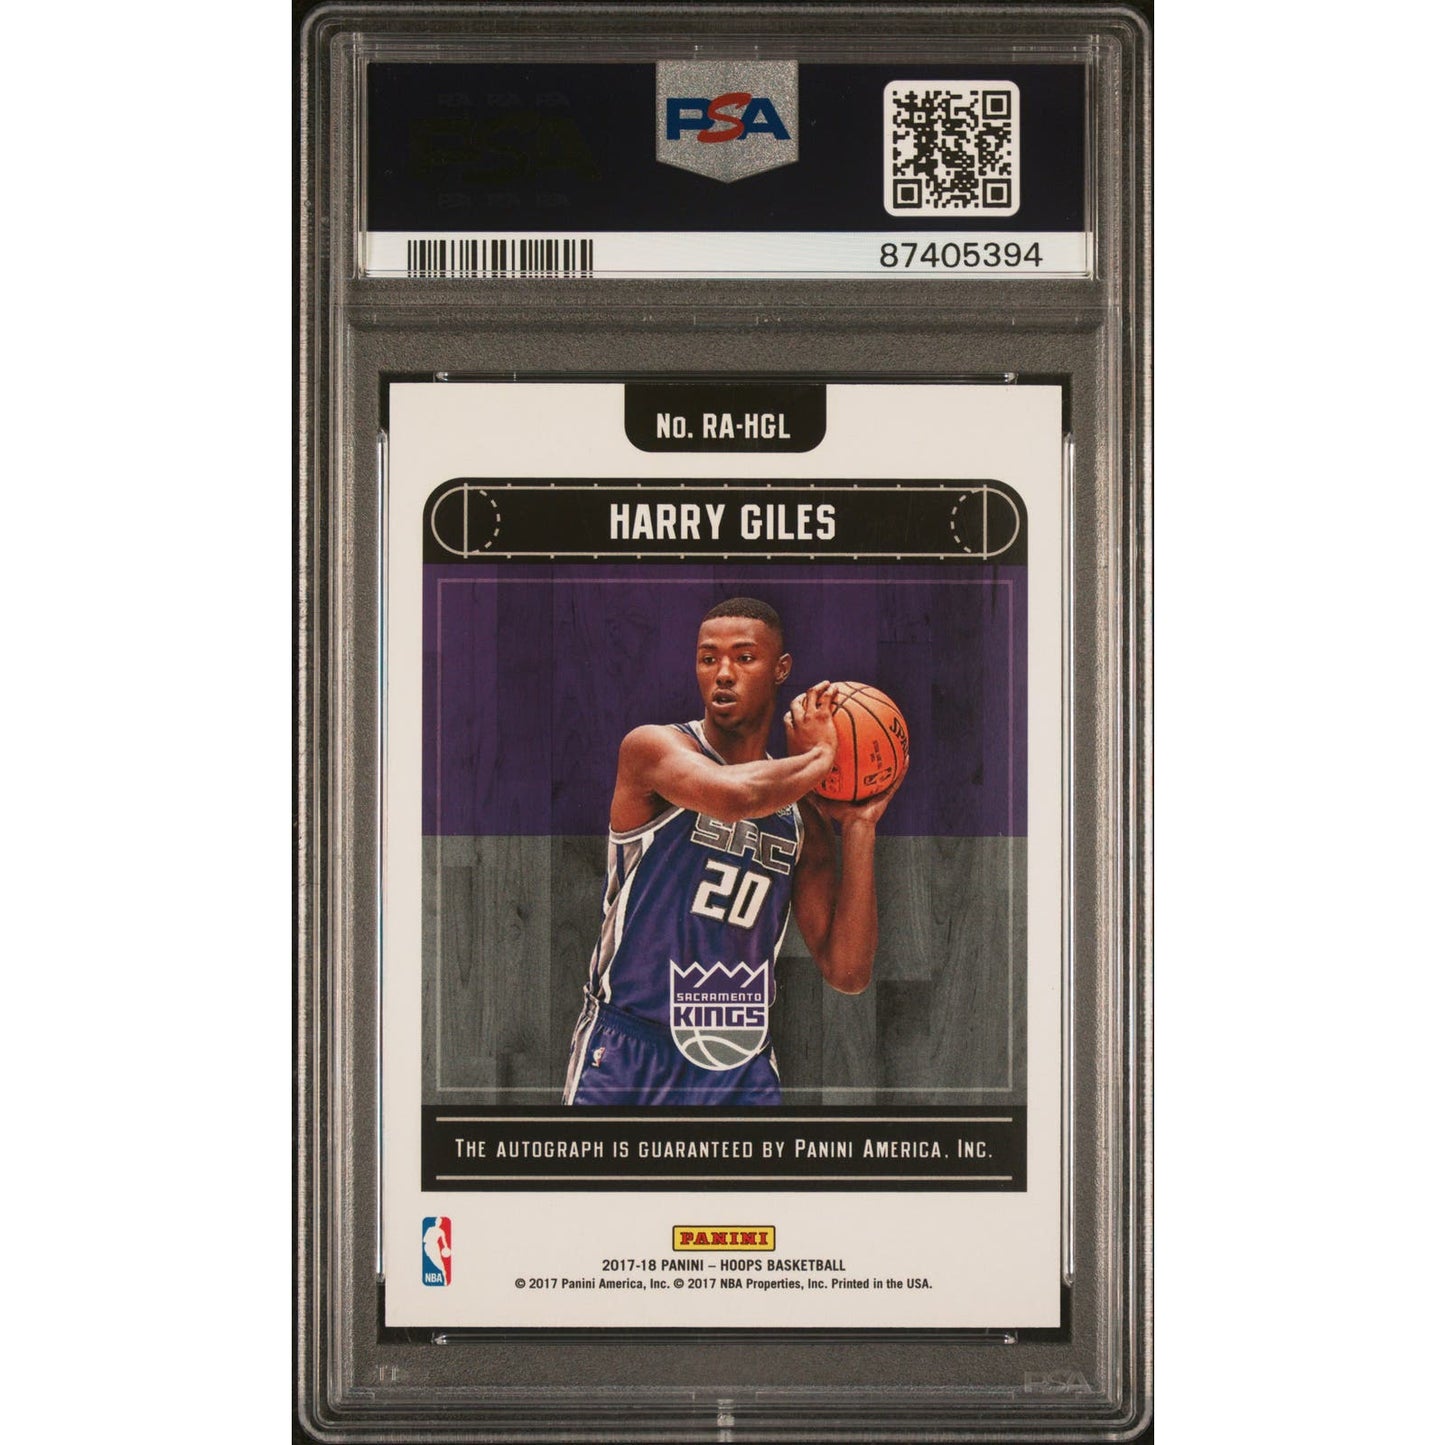 2017-18 PANINI HOOPS ROOKIE AUTOGRAPH #HGL HARRY GILES RED RC AUTO /25 PSA 9